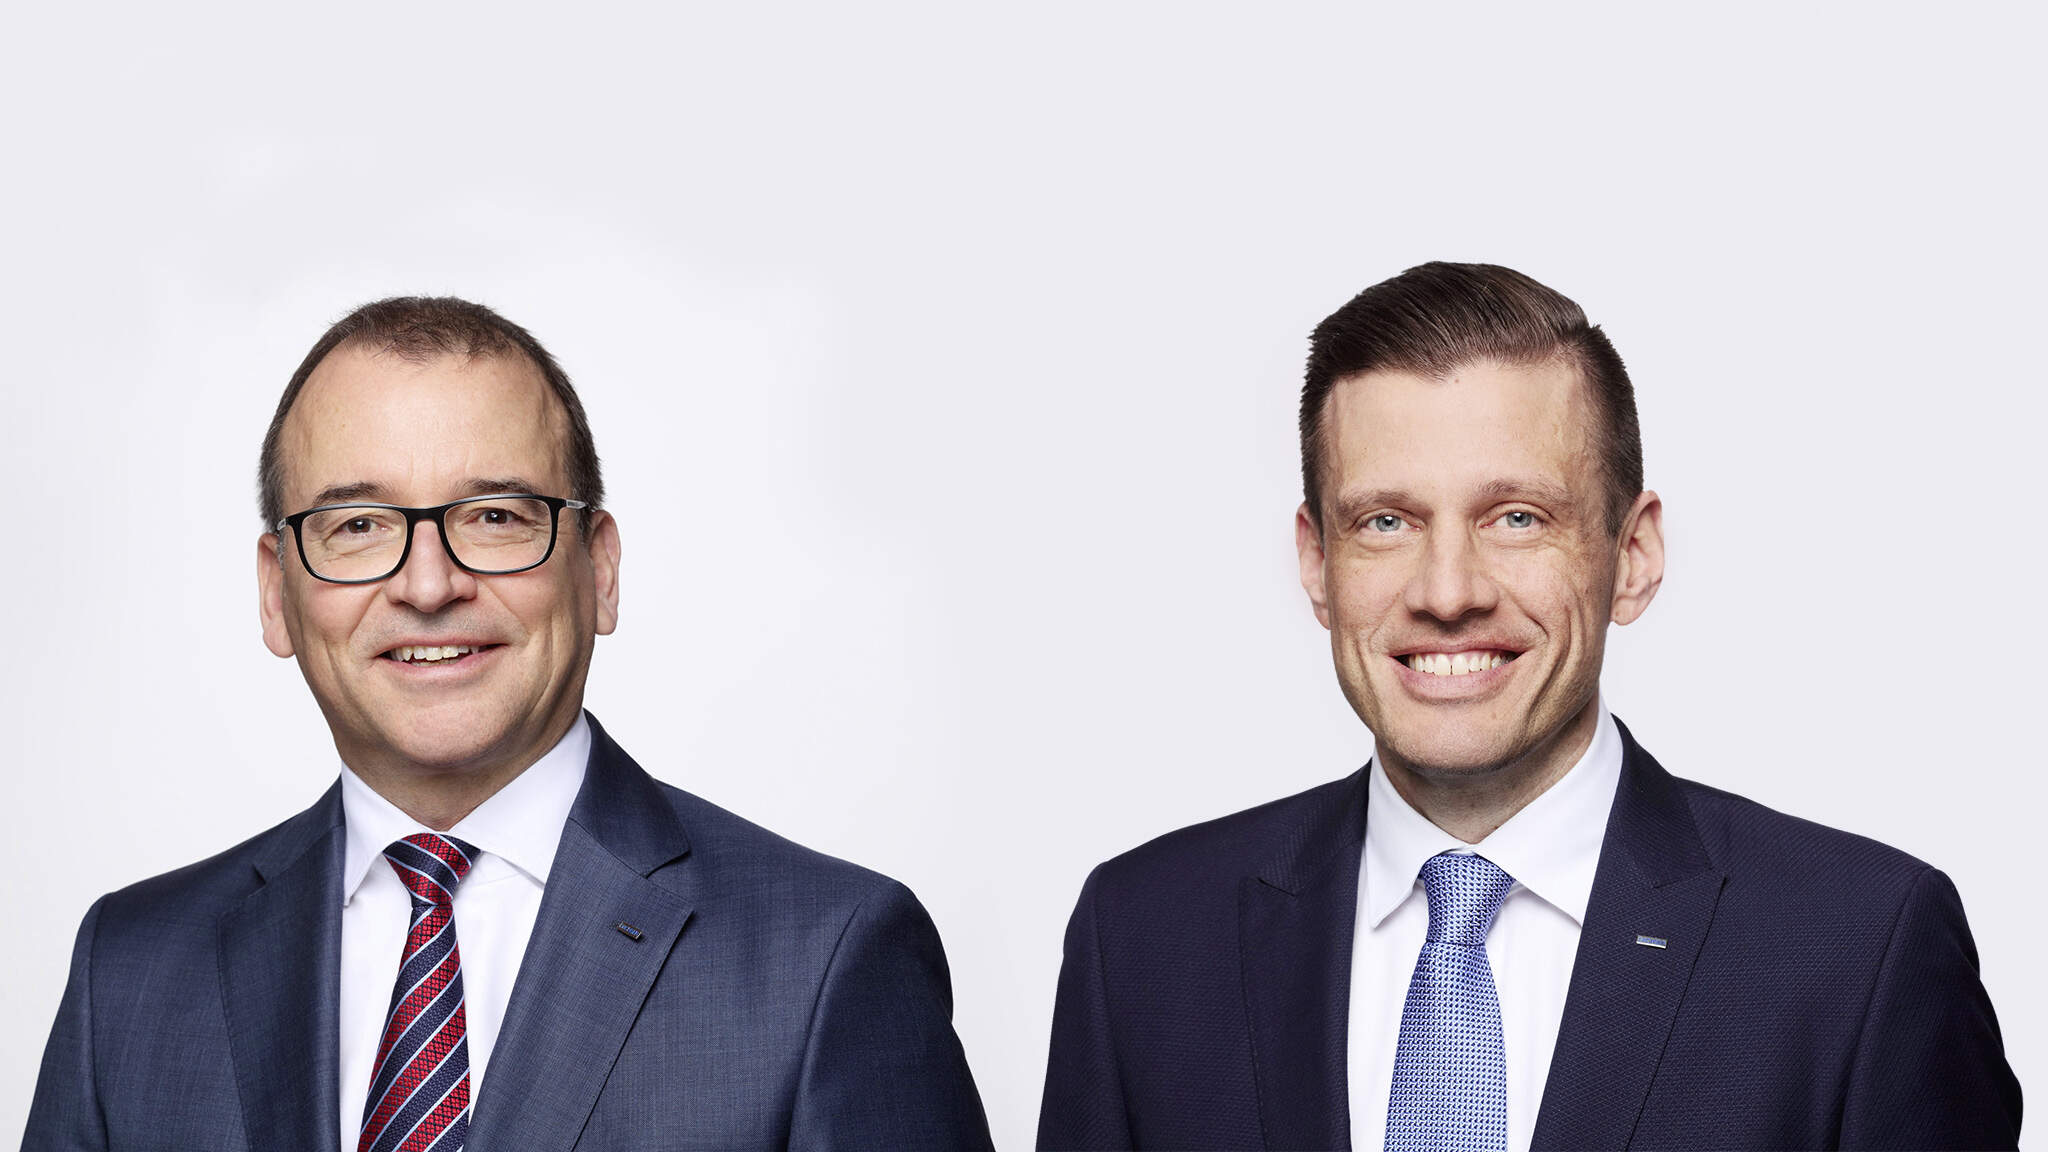 Alfred Miller, Managing Director at DACHSER Food Logistics (left) and Alexander Tonn, Chief Operations Officer (COO) Road Logistics at DACHSER (right).